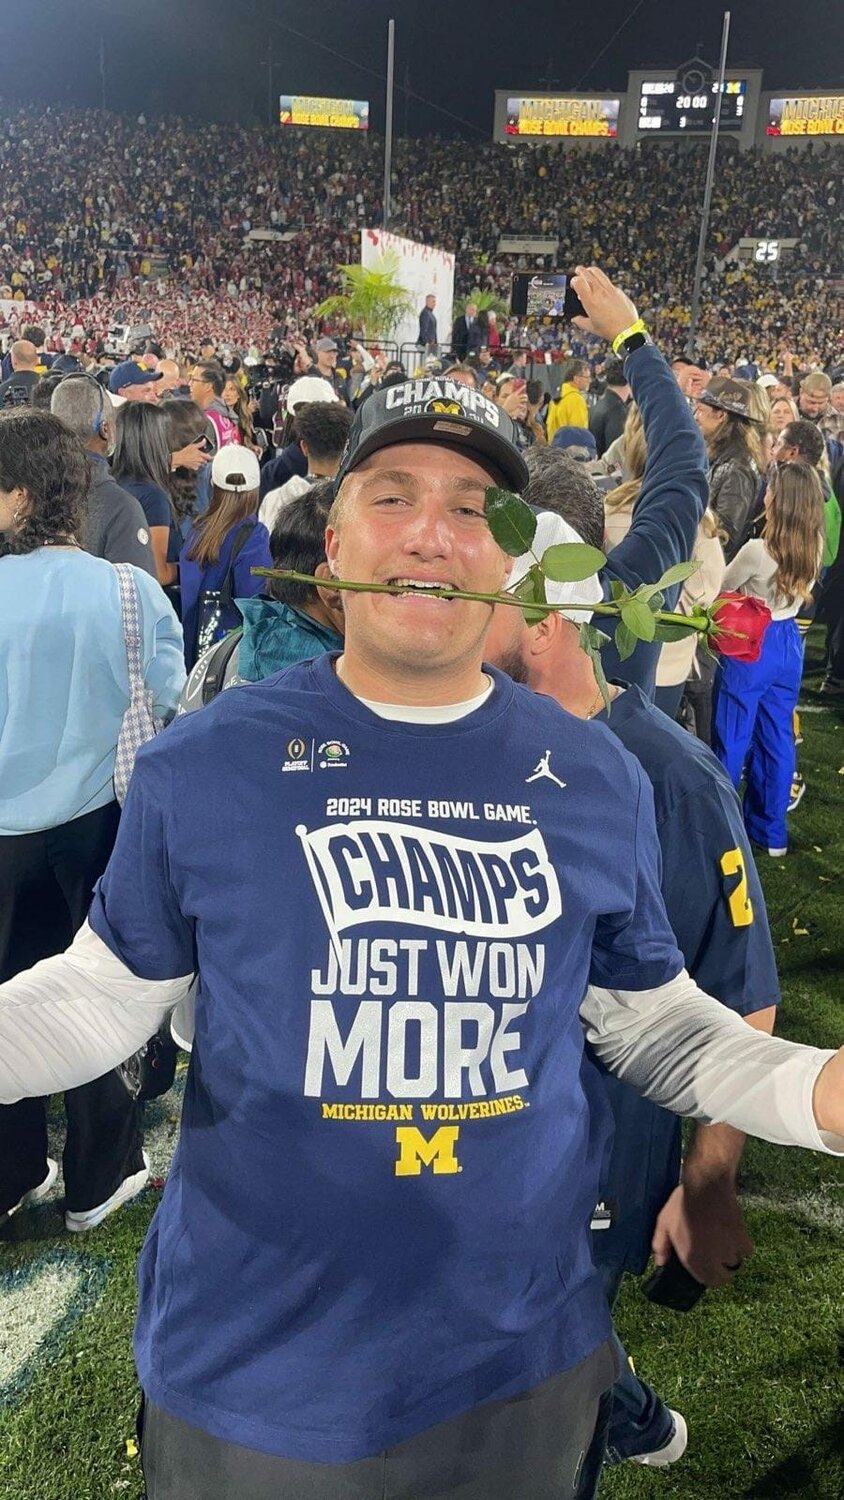 Just a couple of weeks after signing to play football with the University of Michigan, Ponte Vedra High’s Jake Guarnera was on the sideline and celebrating a Rose Bowl victory over Alabama on New Years Day.